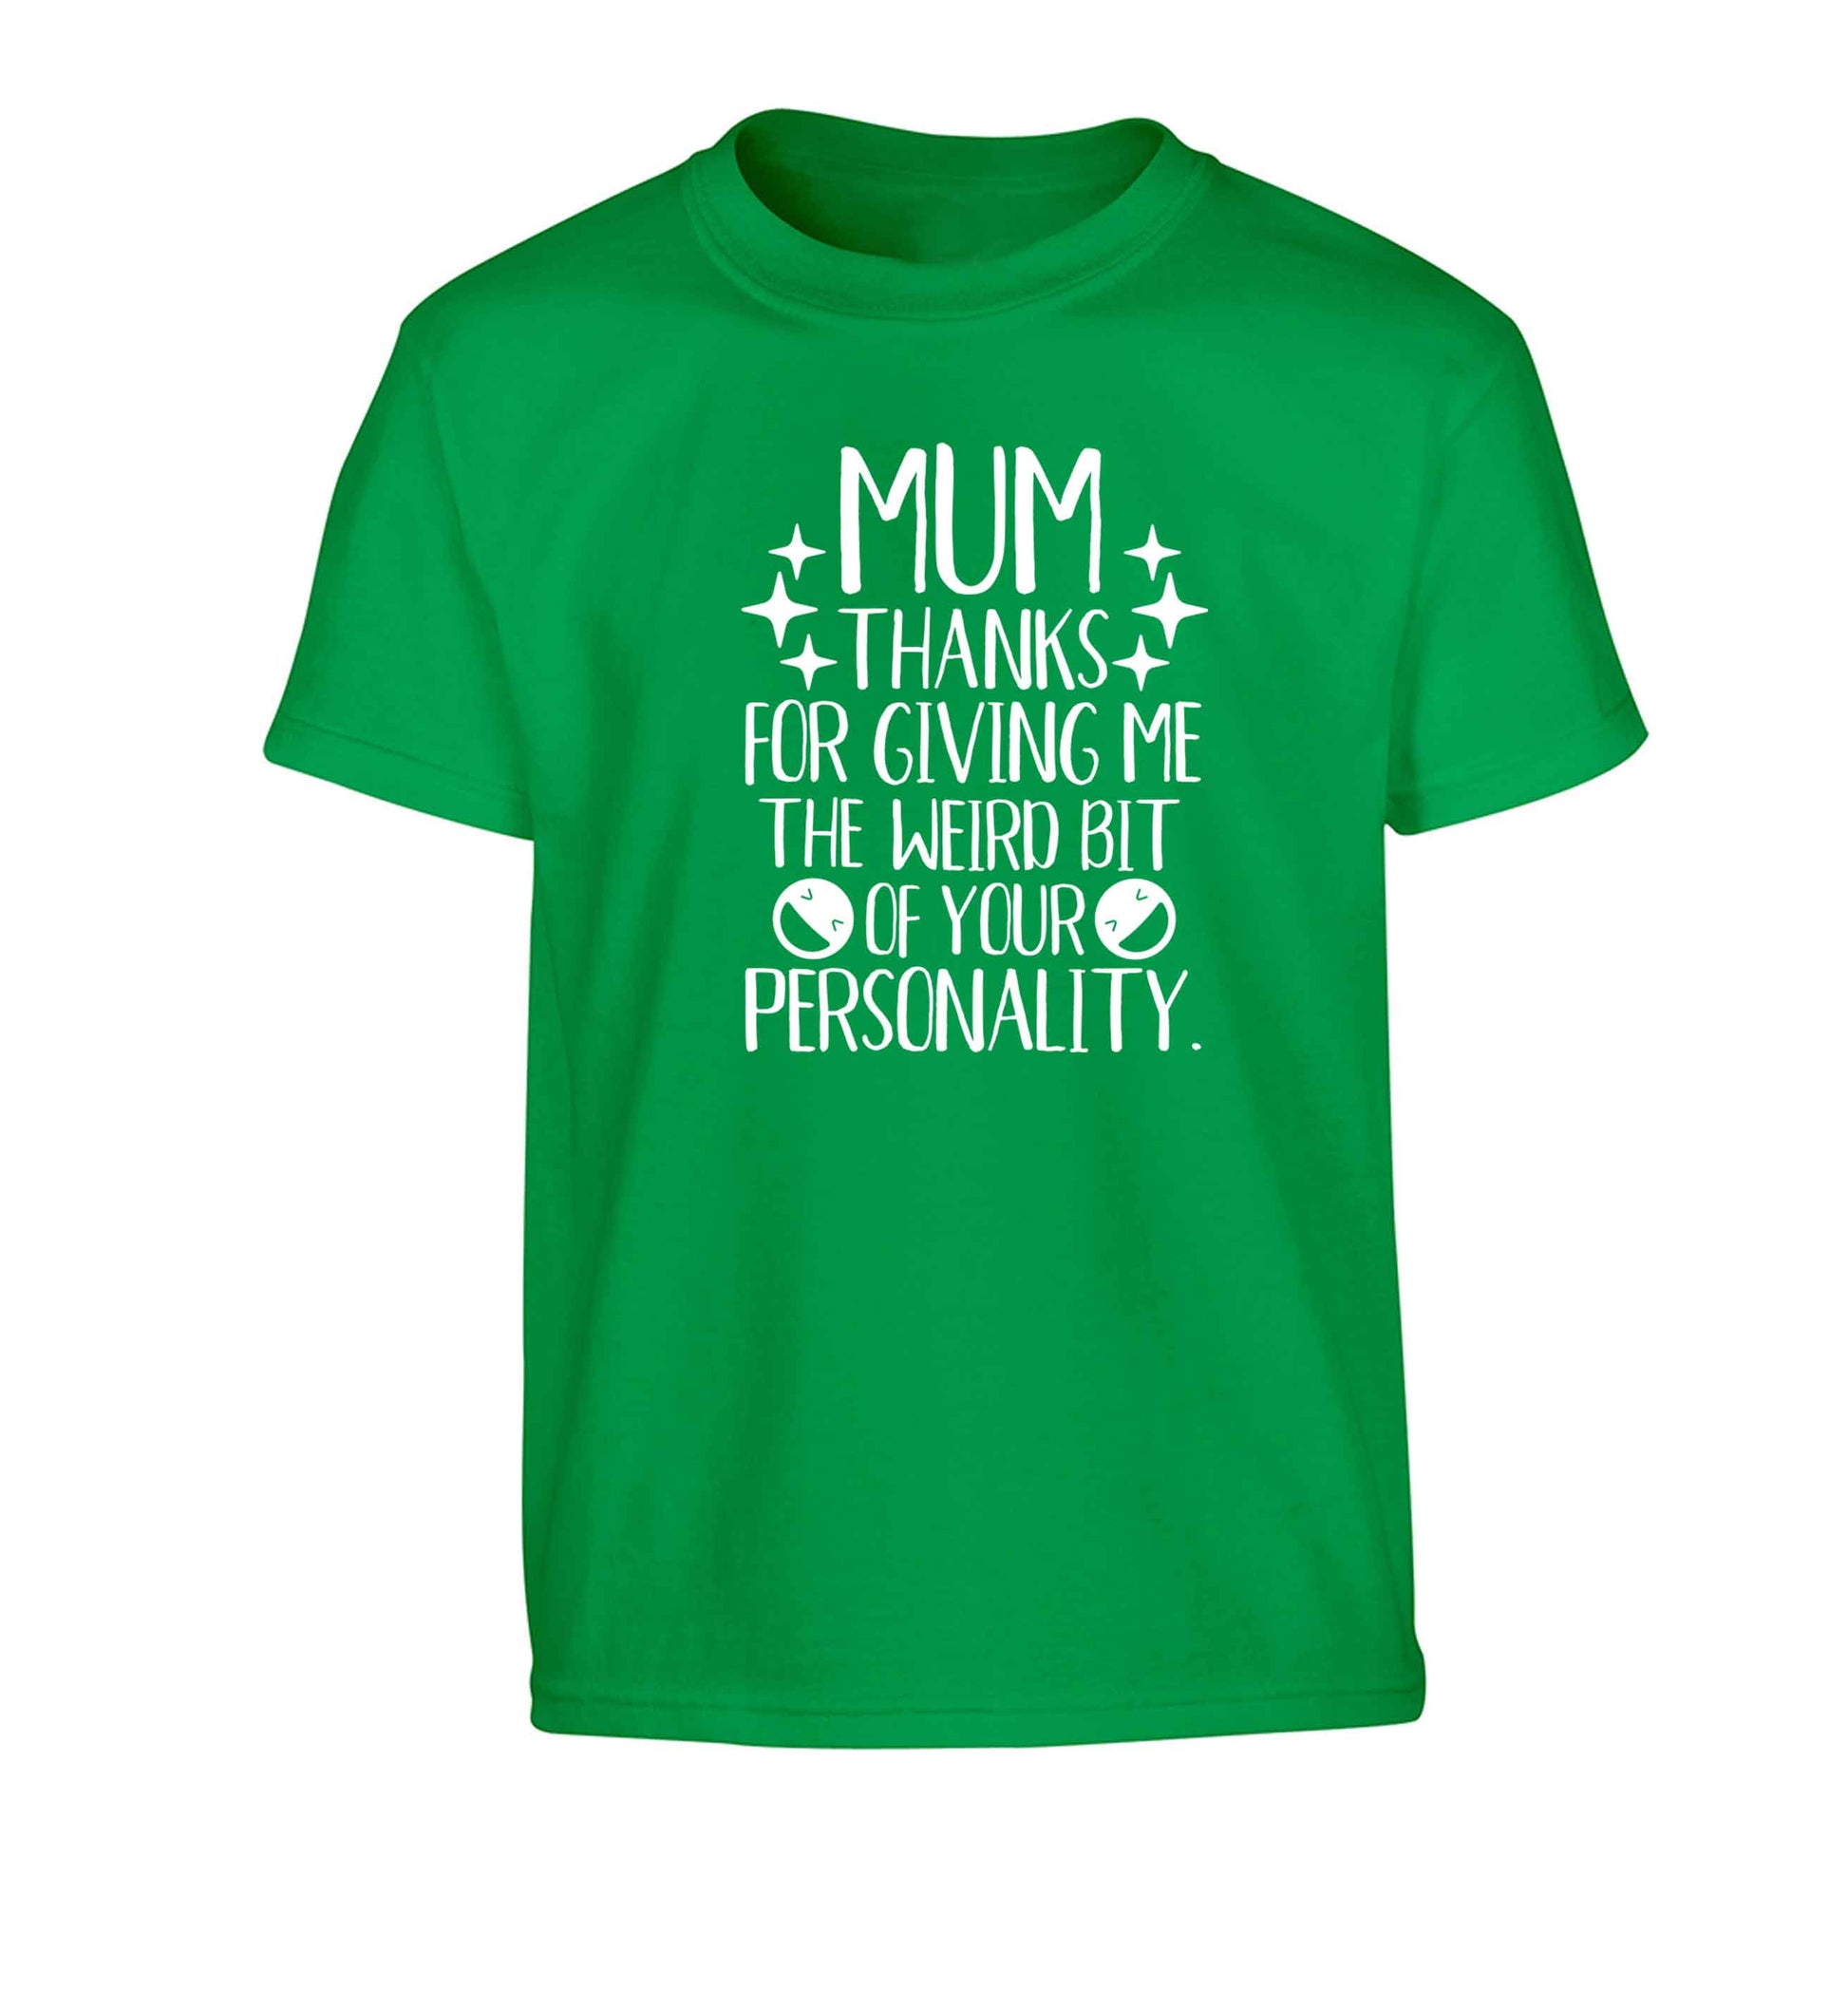 Mum, I love you more than halloumi and if you know me at all you know how deep that is Children's green Tshirt 12-13 Years